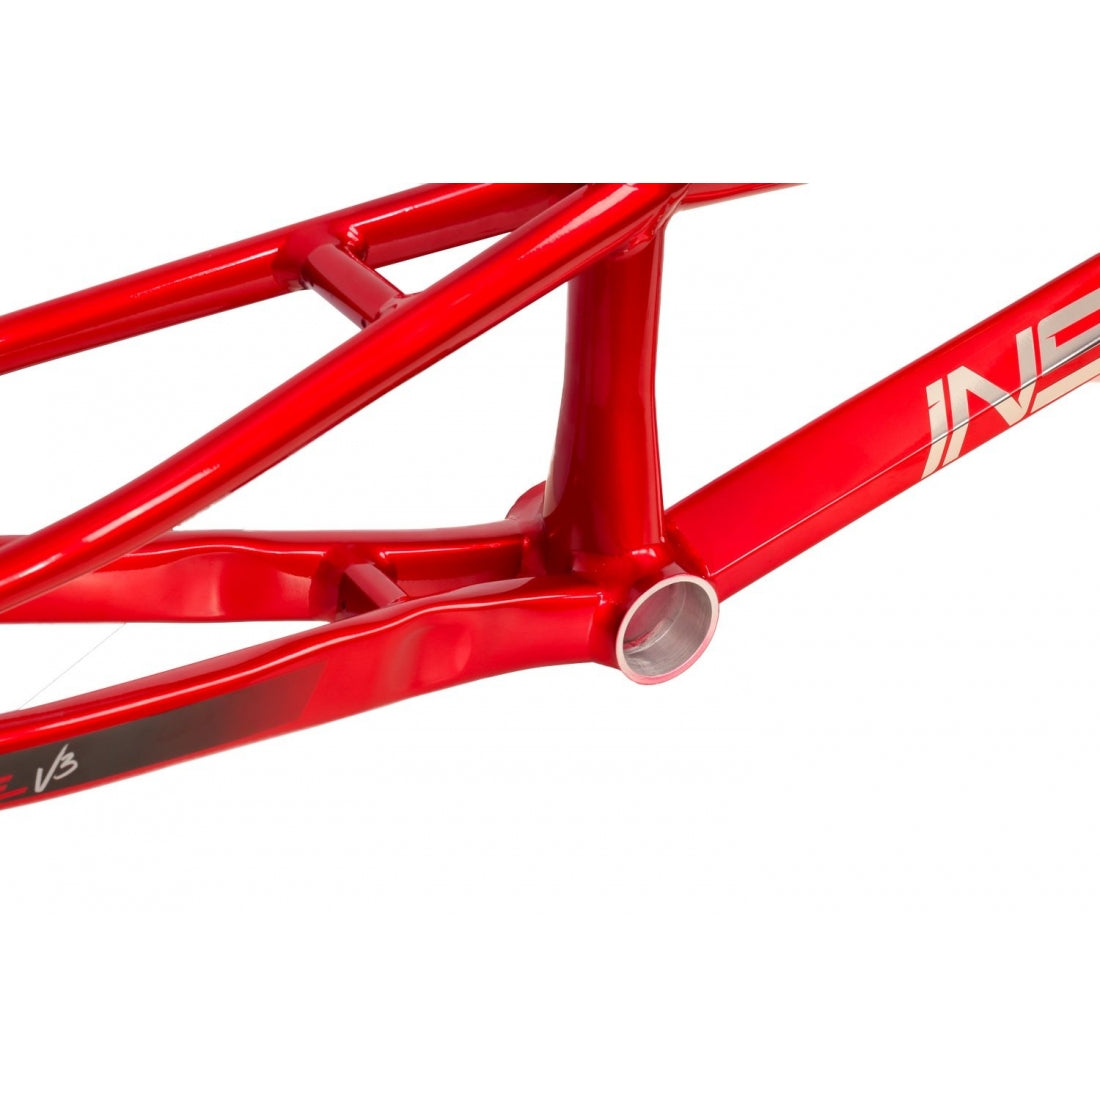 Close-up of an Inspyre Concorde V3 Expert Frame red BMX Race bicycle frame showing the seat stay, chain stay, and bottom bracket area.